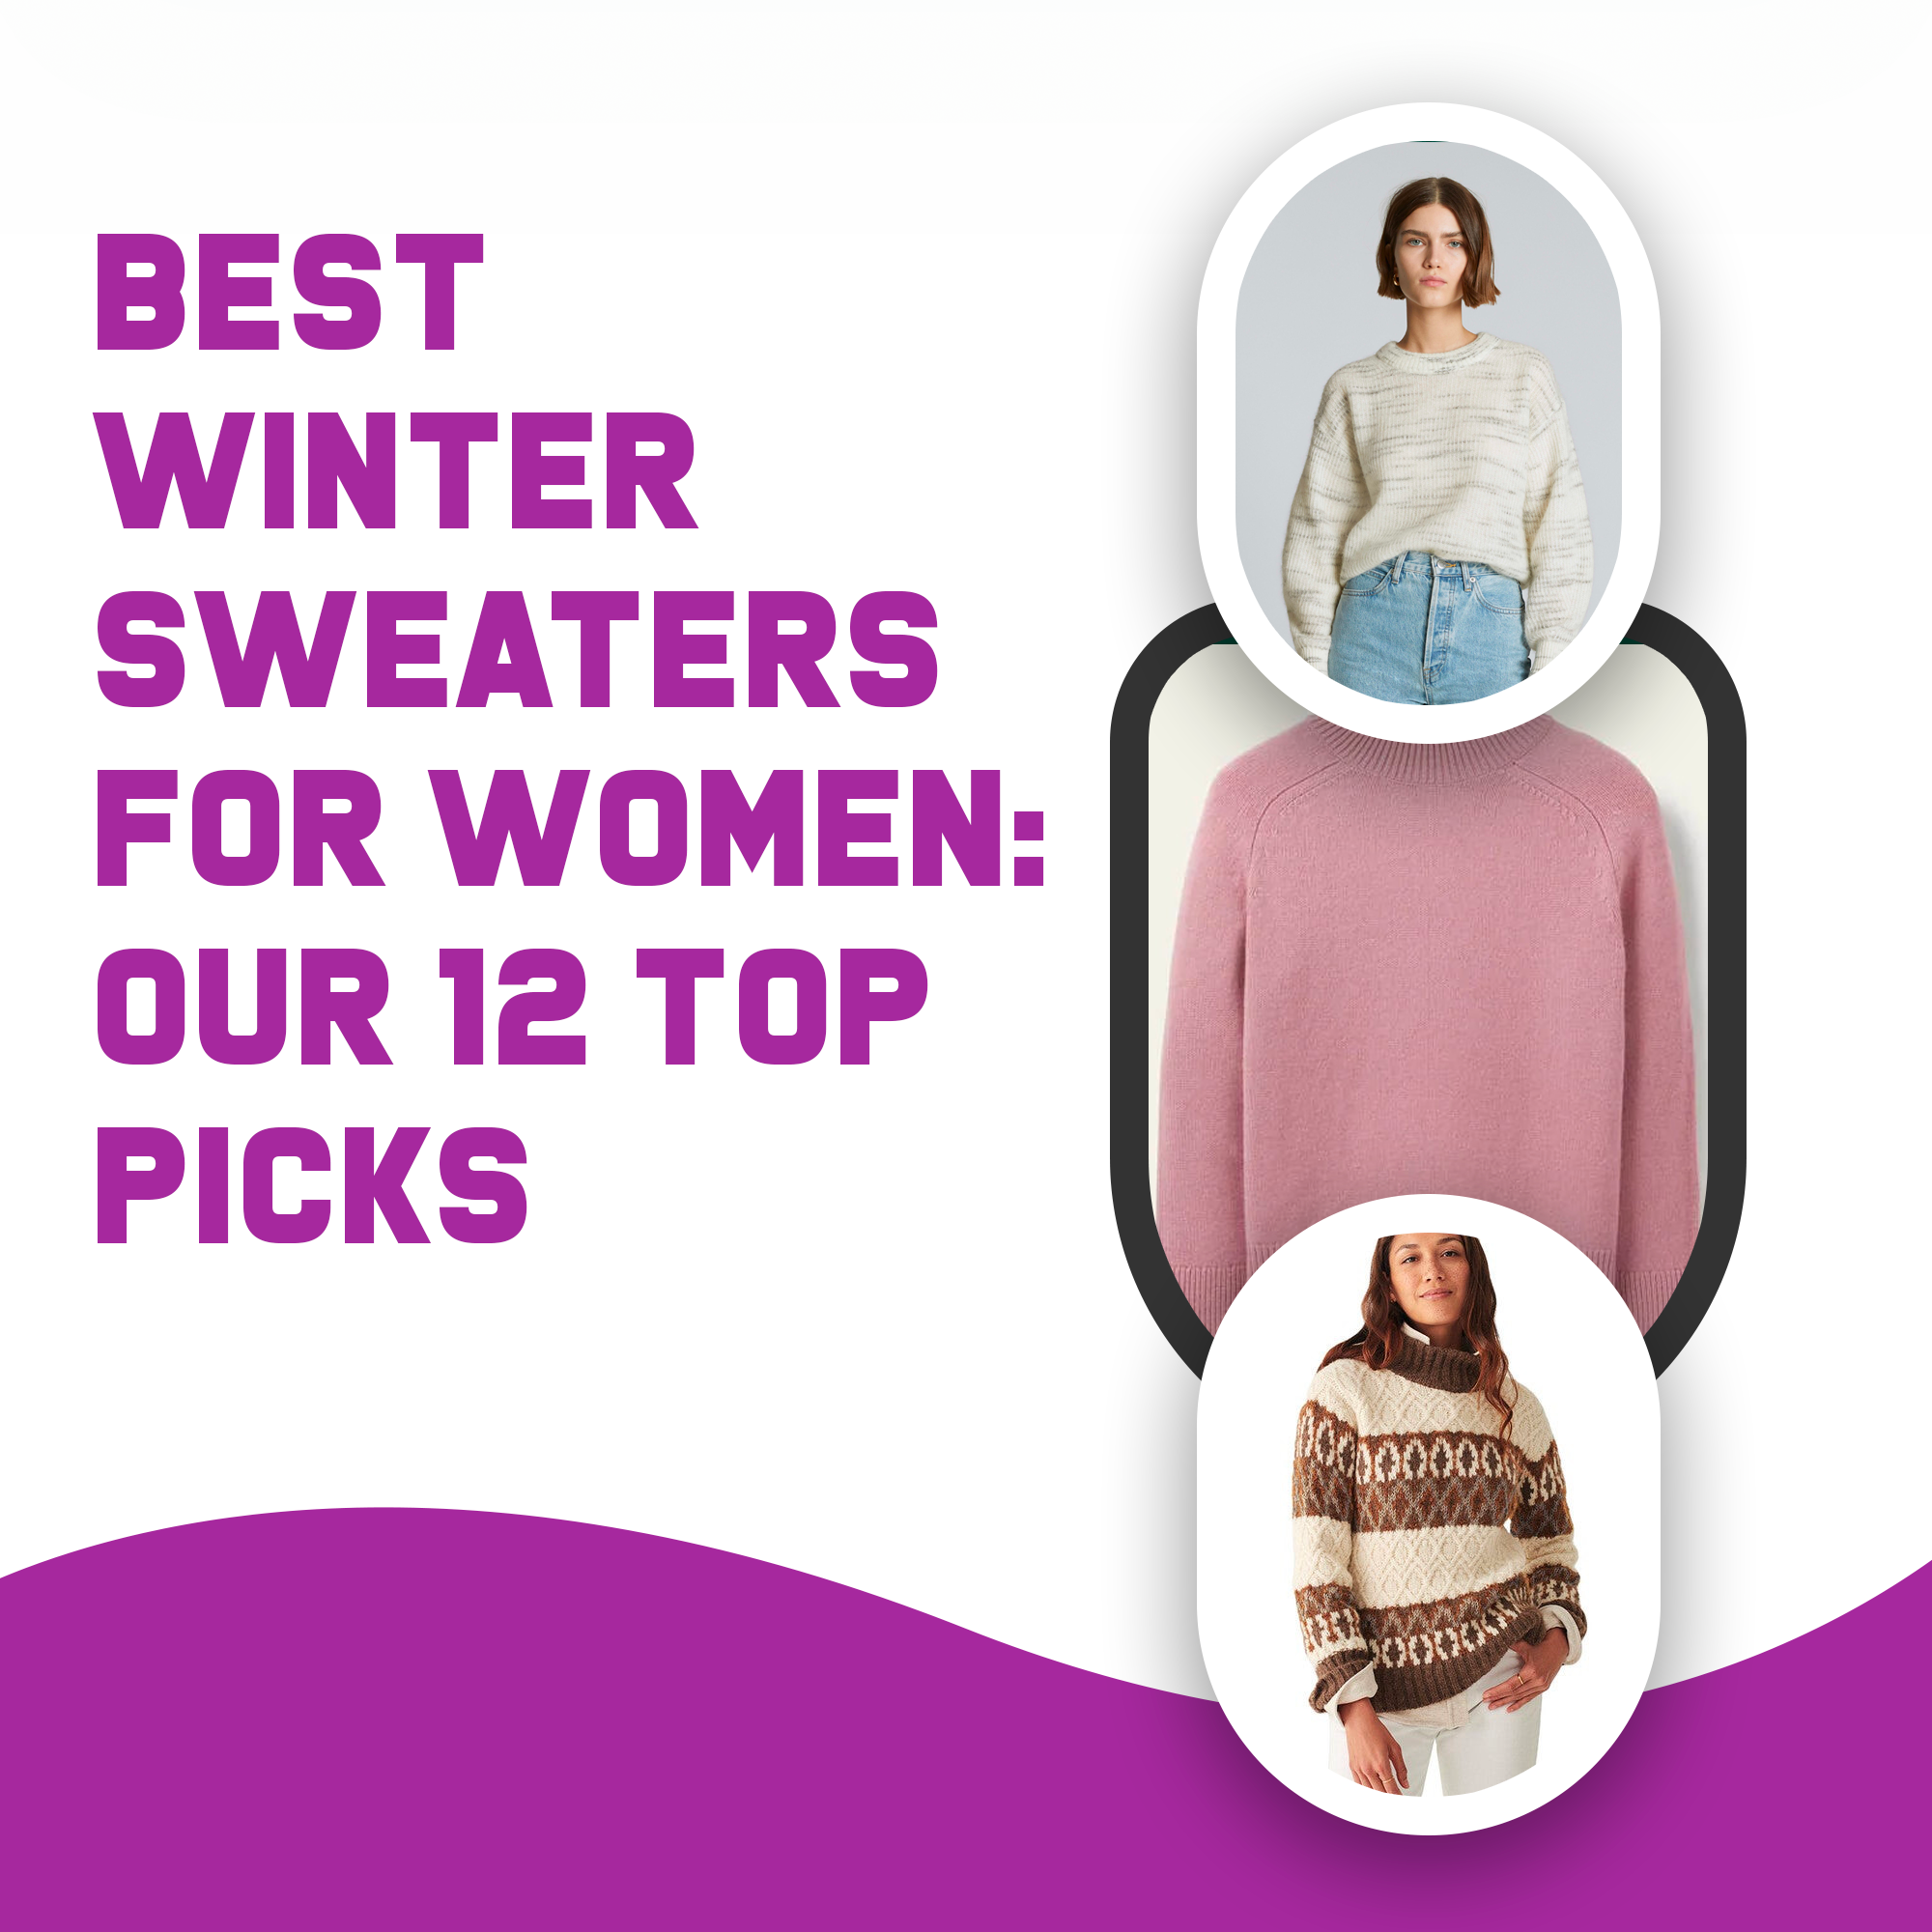 Best Winter Sweaters For Women: Our 12 Top Picks